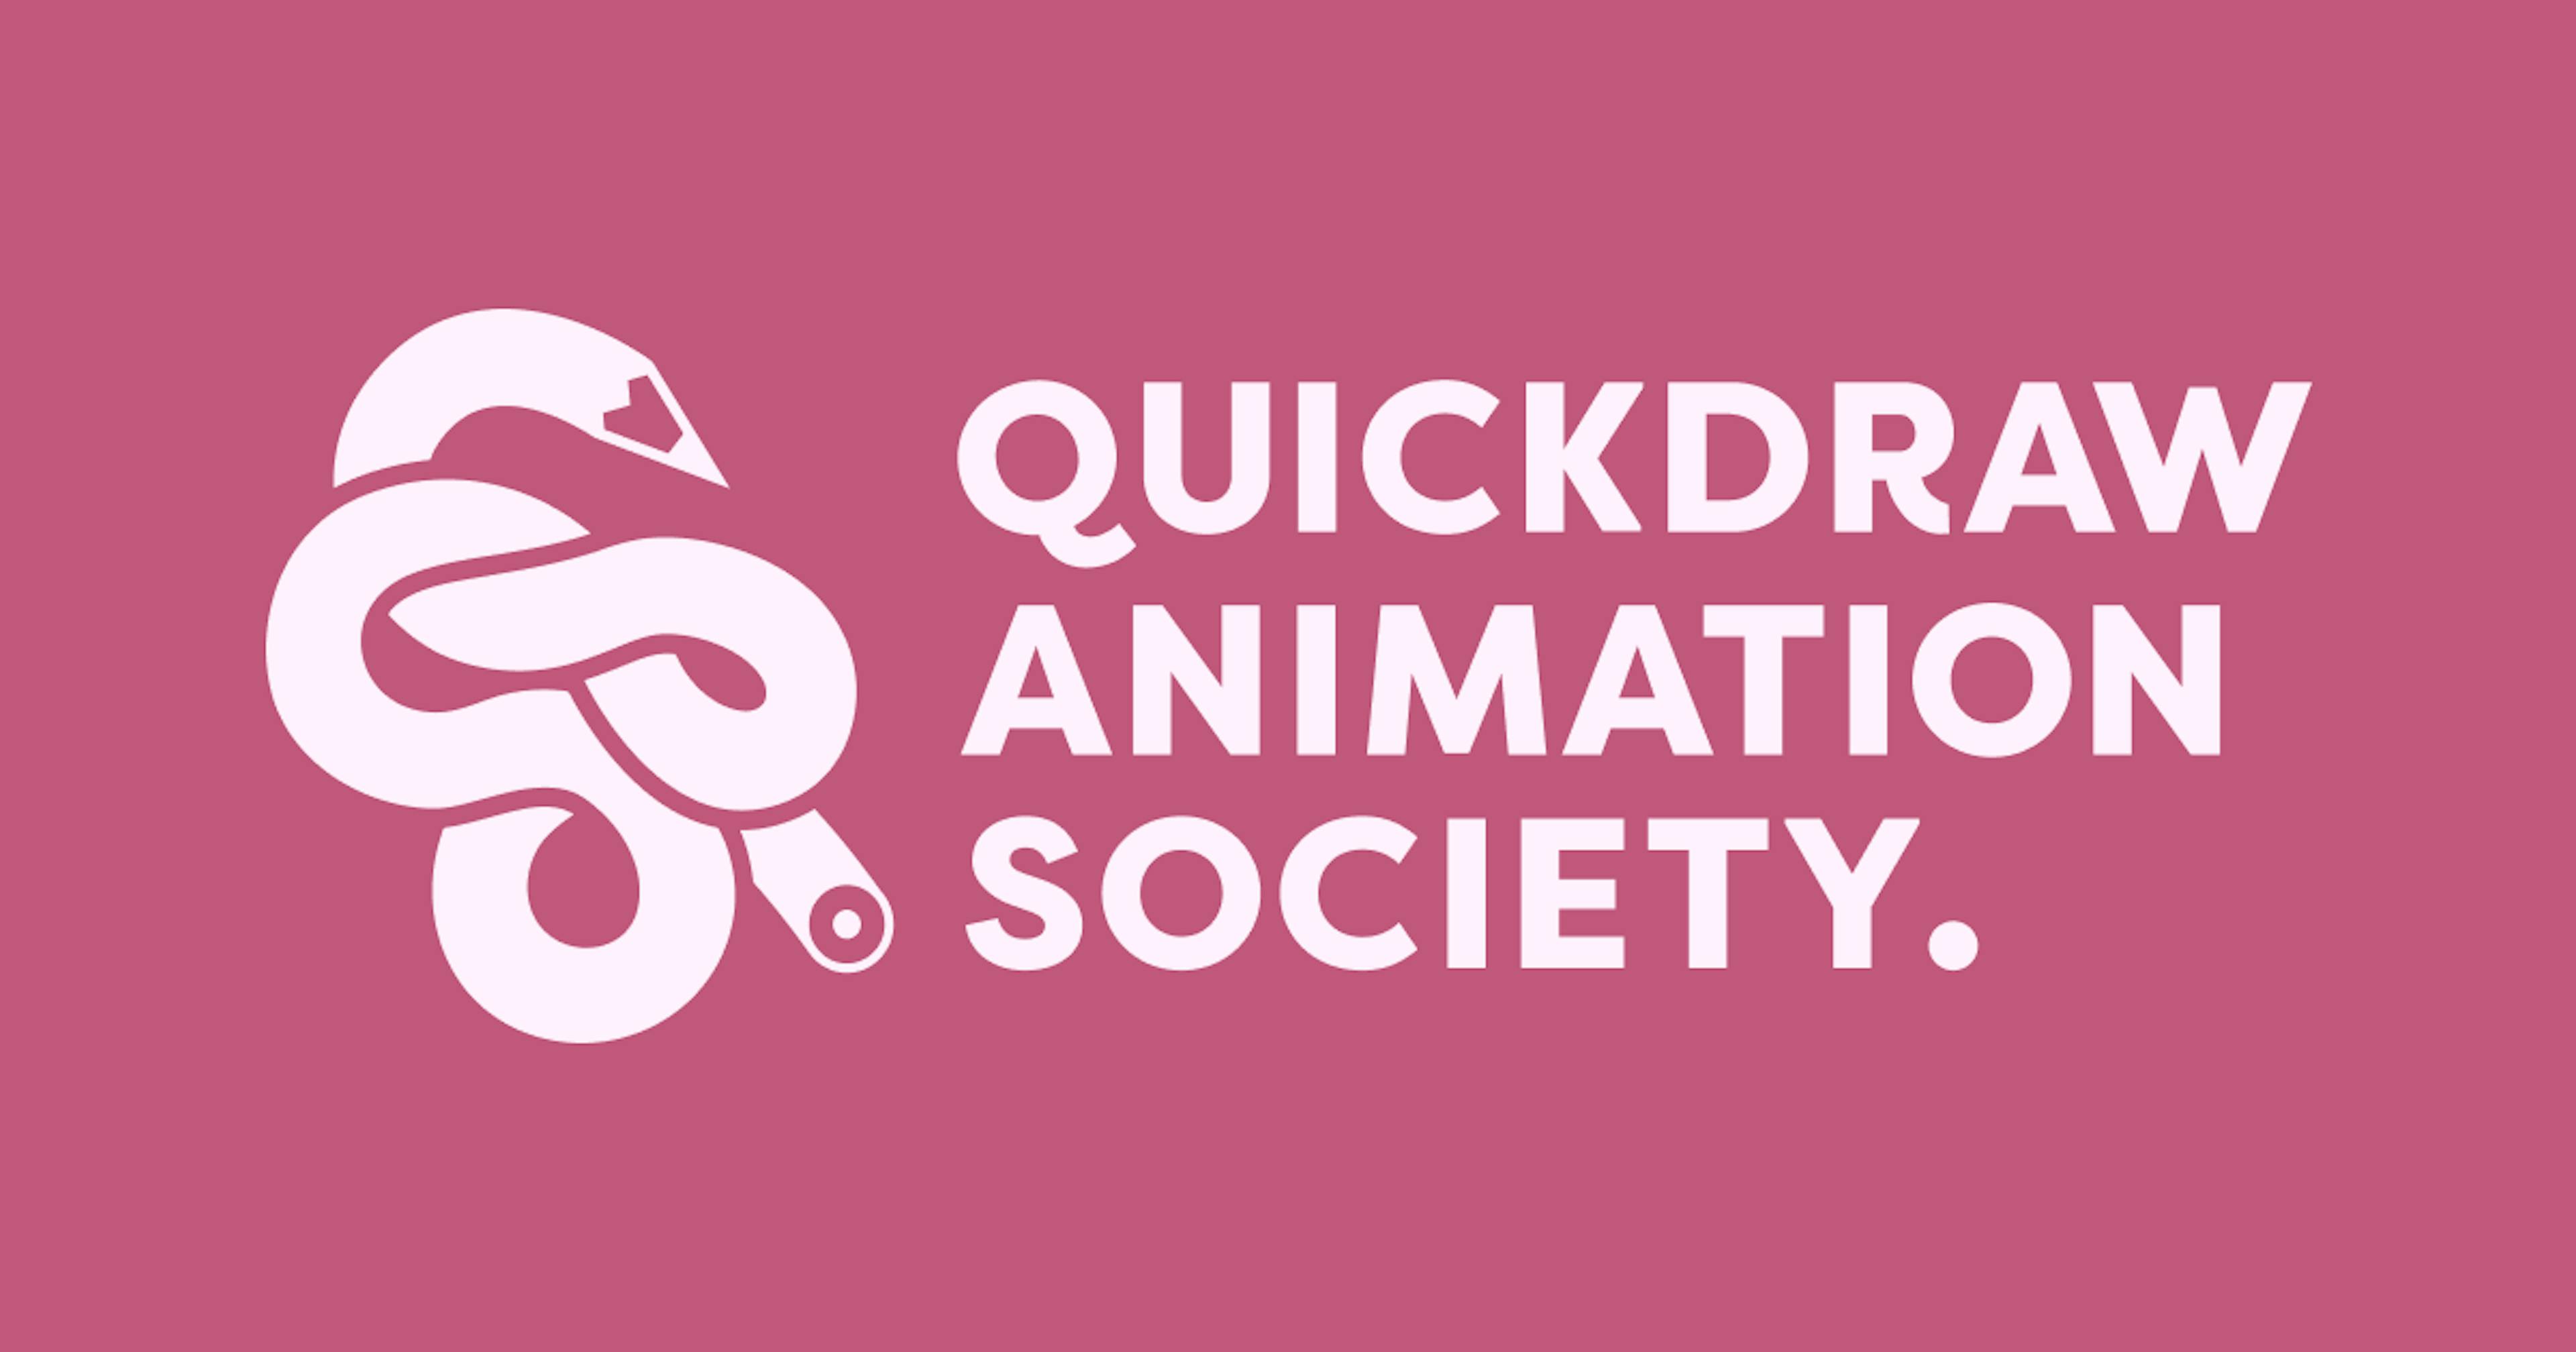 Quickdraw Animation Society logo on a mauve background